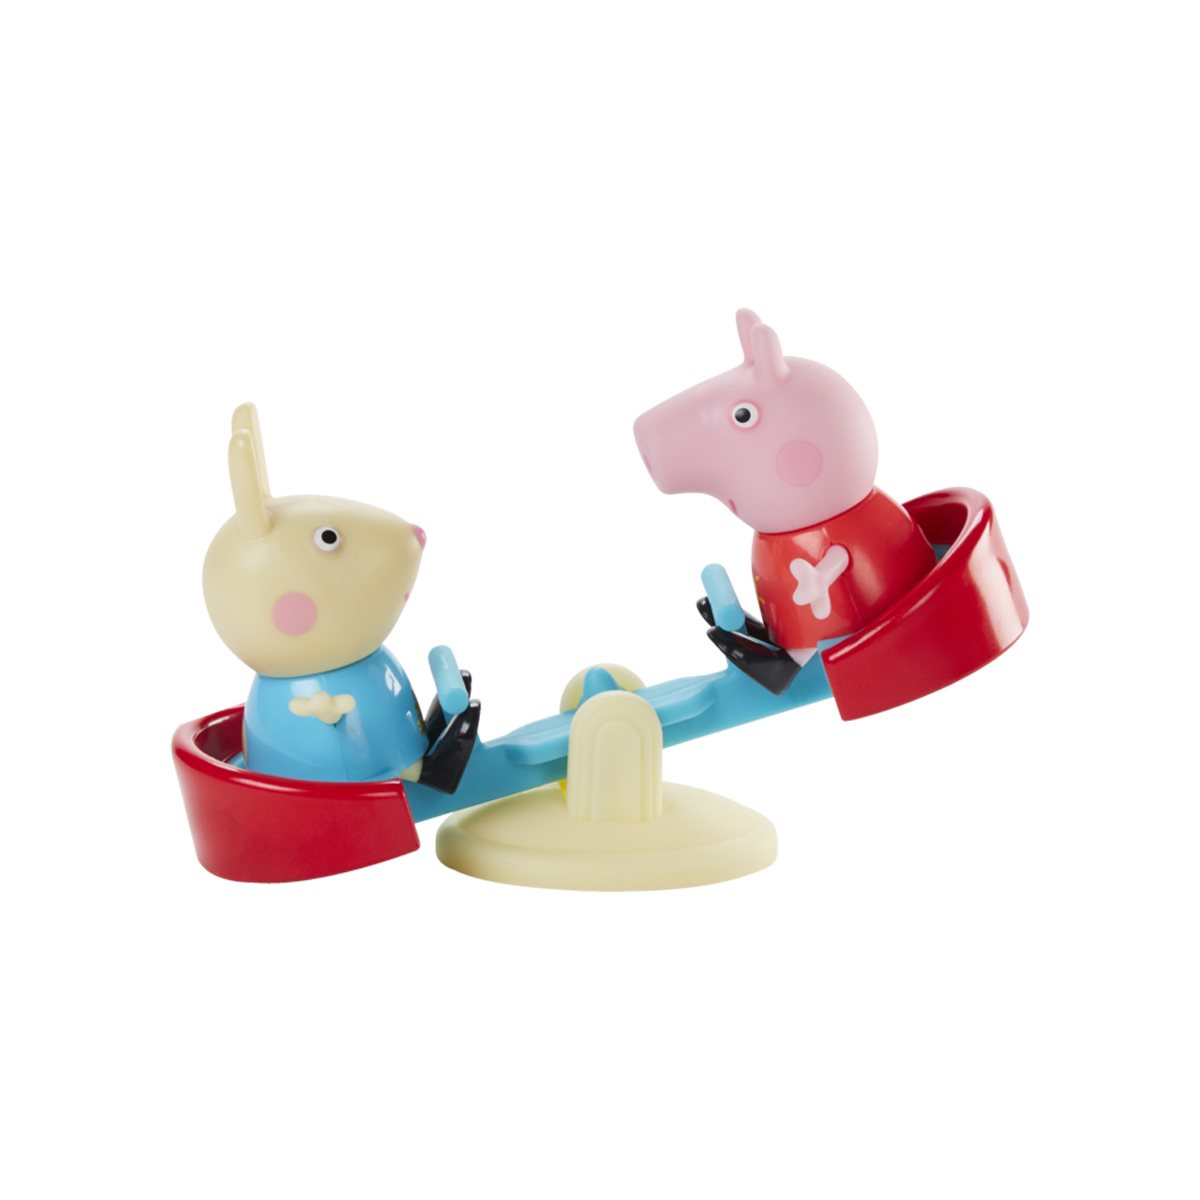 Peppa Pig Peppa's Adventures Little Boat Toy Includes 3-inch George Pig  Figure